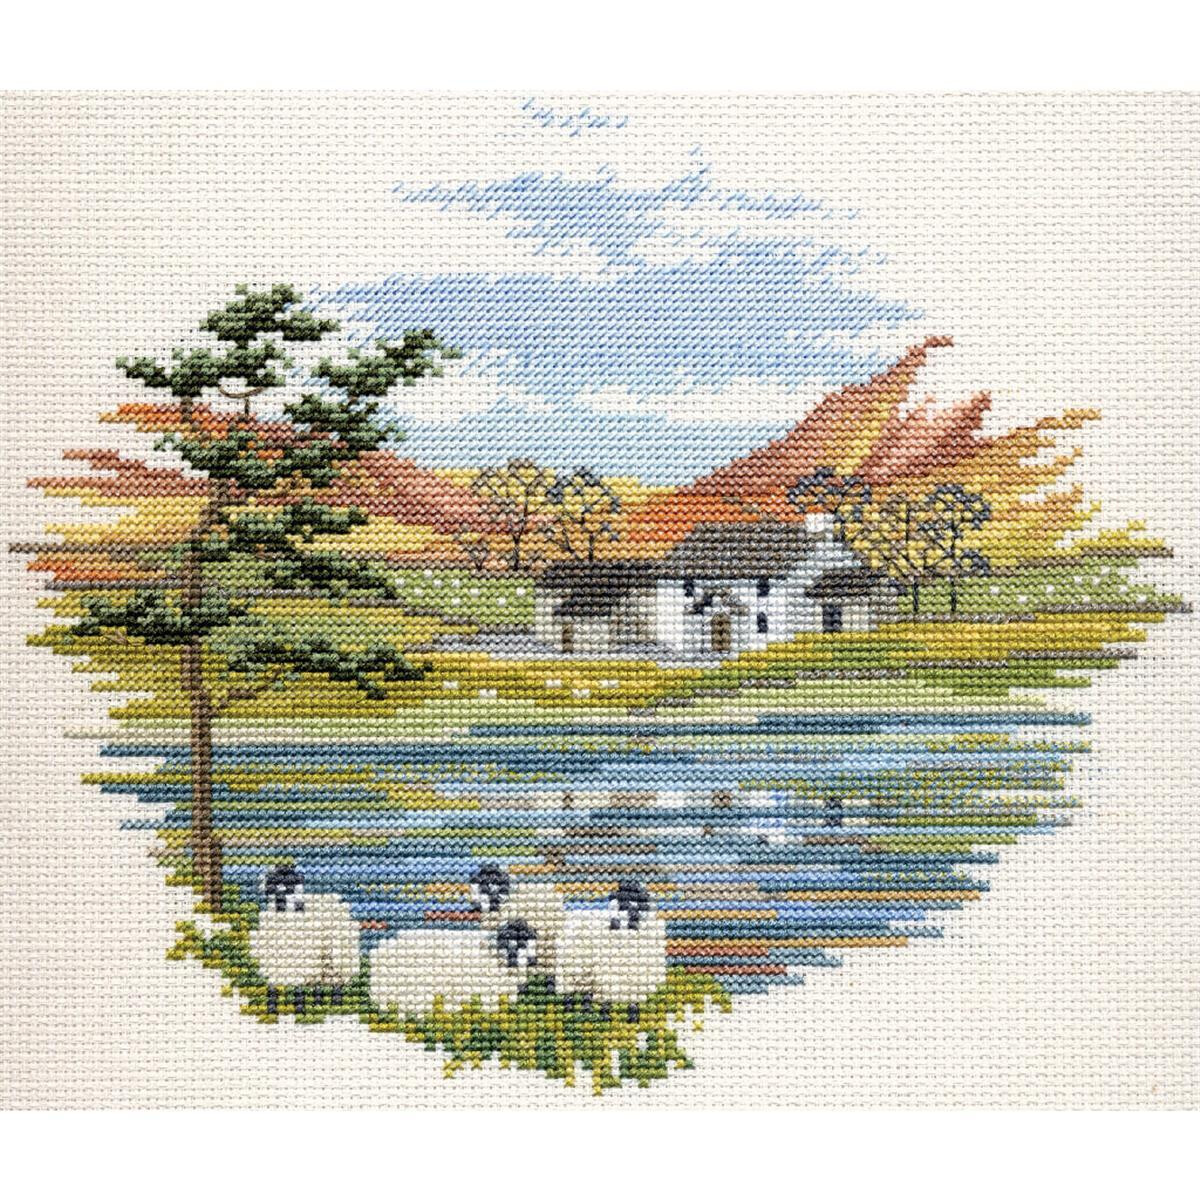 An embroidery pack or cross stitch artwork by Bothy...